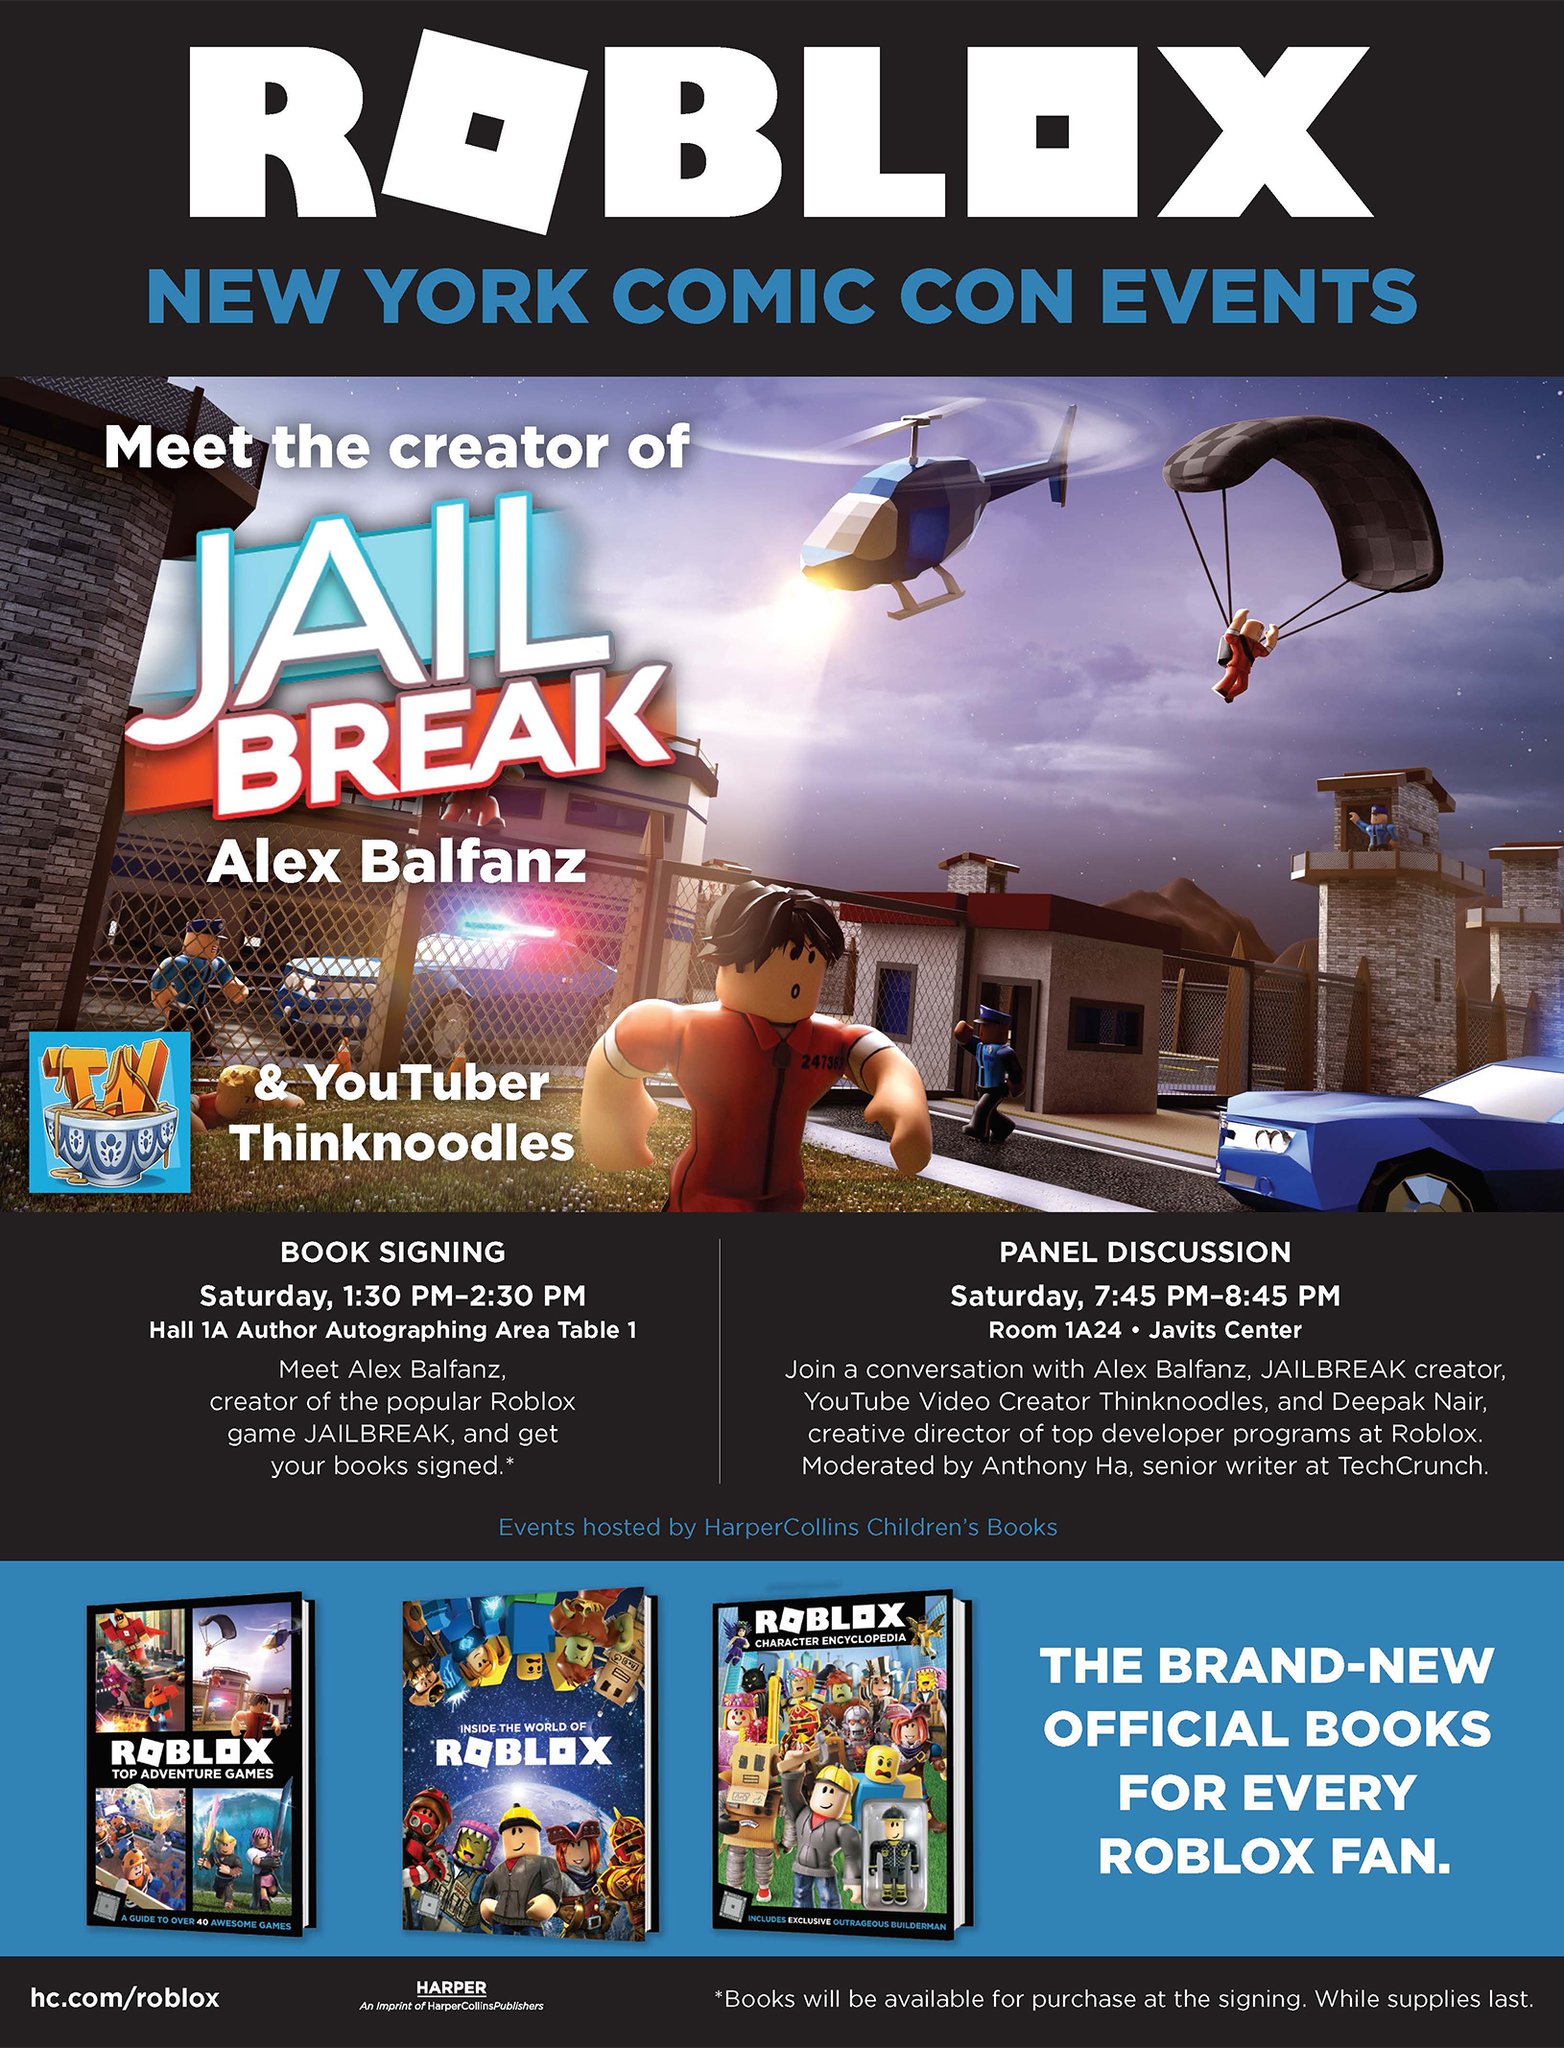 Alex Balfanz On Twitter Hey Jailbreak Fans I M Heading To Nyc For Ny Comic Con With Roblox Book Signing Panel Saturday 10 6 Details Here Https T Co 9bc0prwmaw Nycc Https T Co Itzargmpjt - thinknoodles roblox jailbreak new